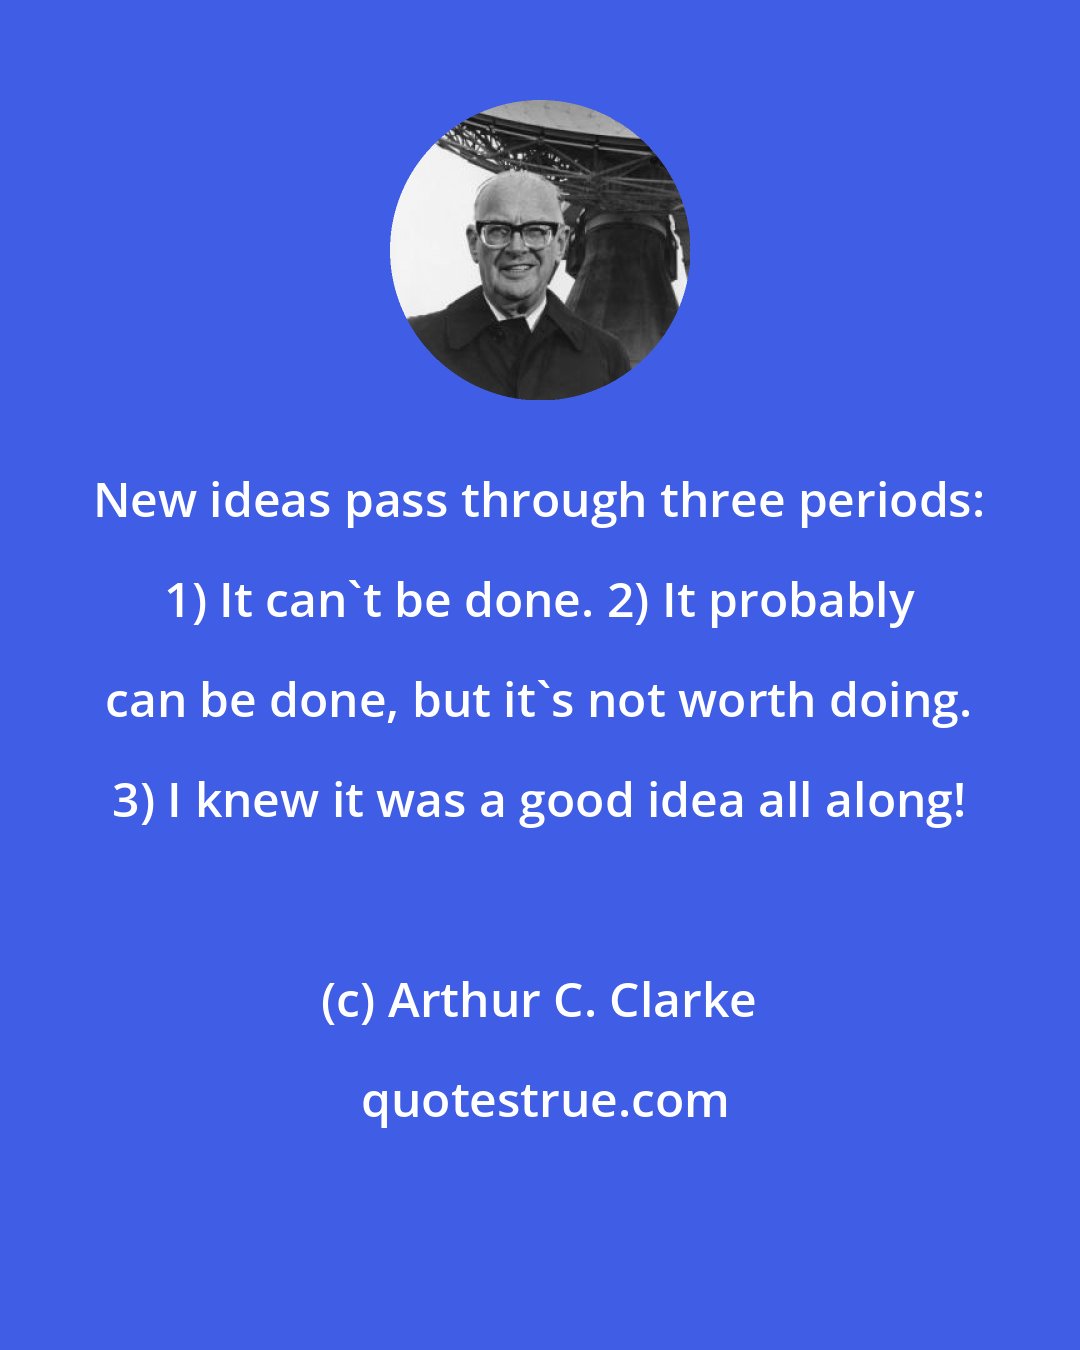 Arthur C. Clarke: New ideas pass through three periods: 1) It can't be done. 2) It probably can be done, but it's not worth doing. 3) I knew it was a good idea all along!